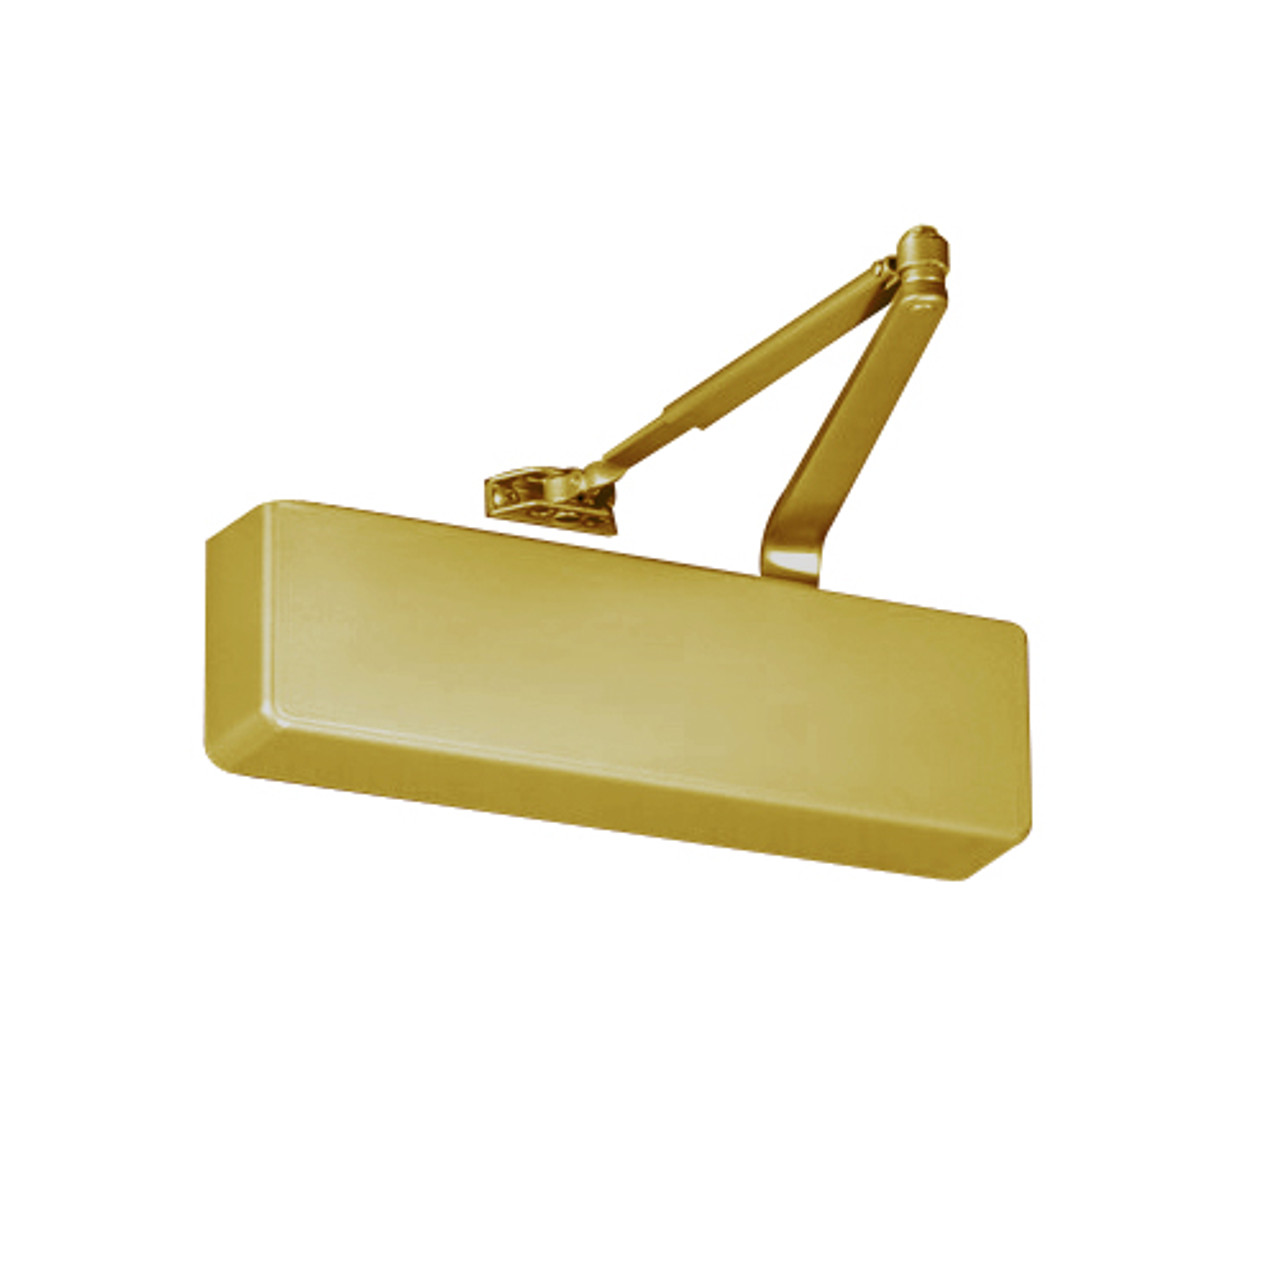 7500HM-696 Norton 7500 Series Hold Open Institutional Door Closer with Regular Parallel or Top Jamb to 3 inch Reveal in Gold Finish